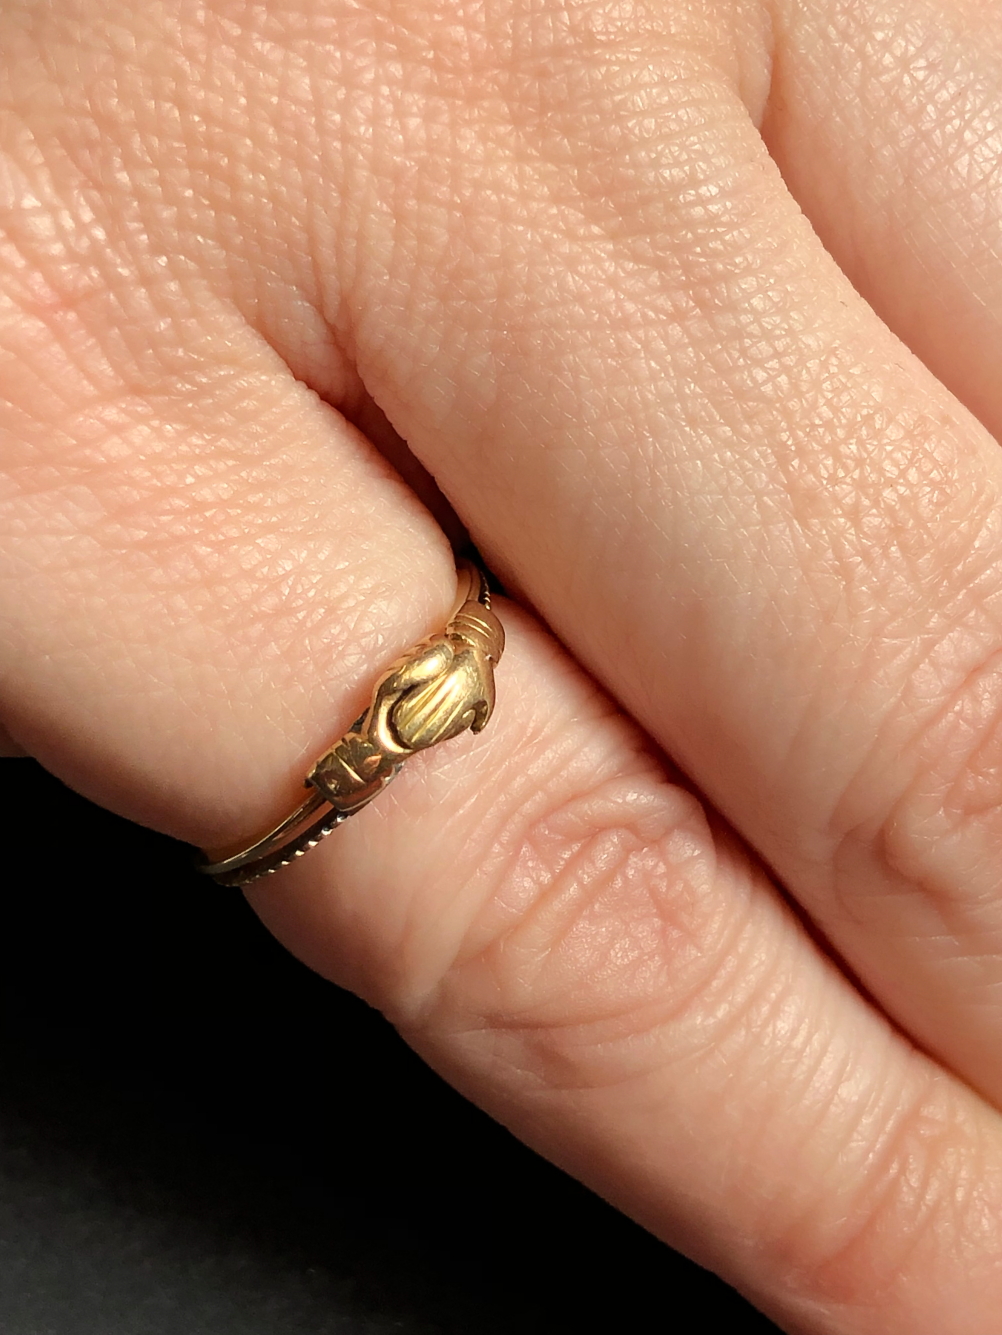 AN ANTIQUE CLASPED HANDS FEDE TYPE RING. NO ASSAY MARKS, ASSESSED AS 16ct GOLD SHANK AND 12ct GOLD - Image 2 of 4